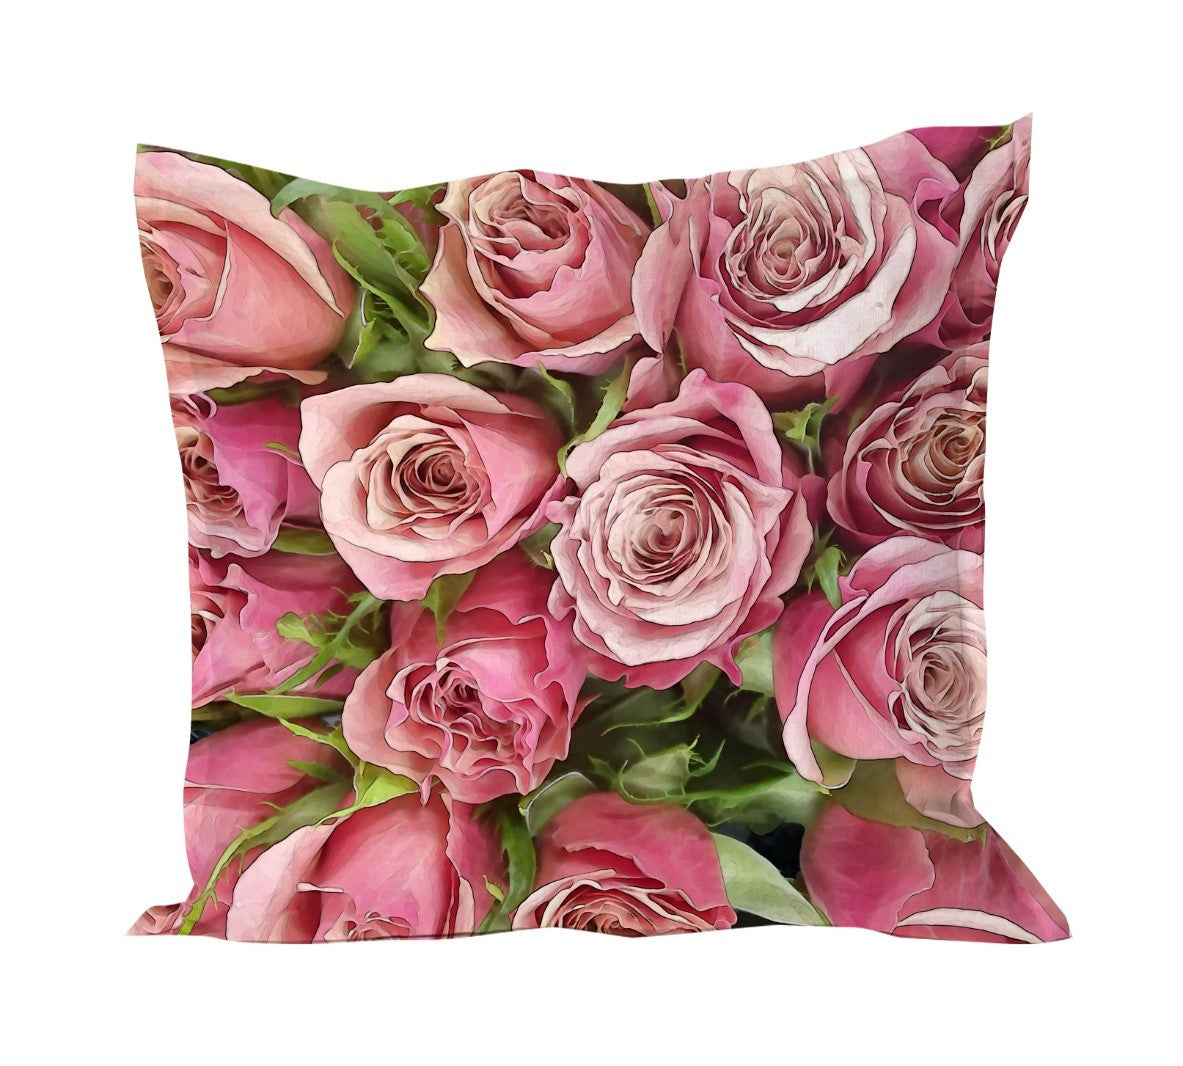 Cushion cover in Rose Dark Pink